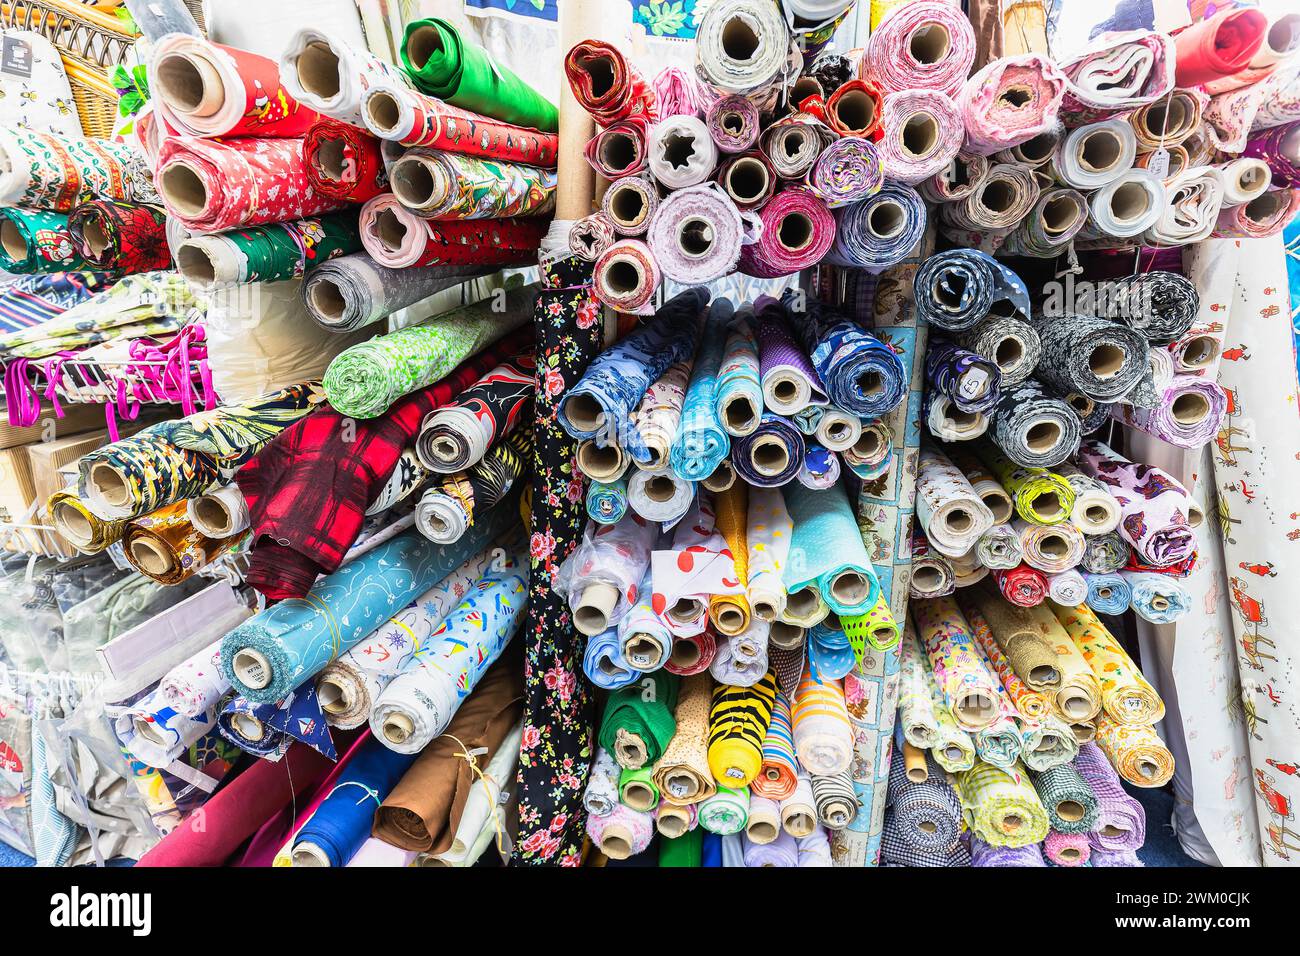 Fabric crafting materials displayed in a shop Stock Photo